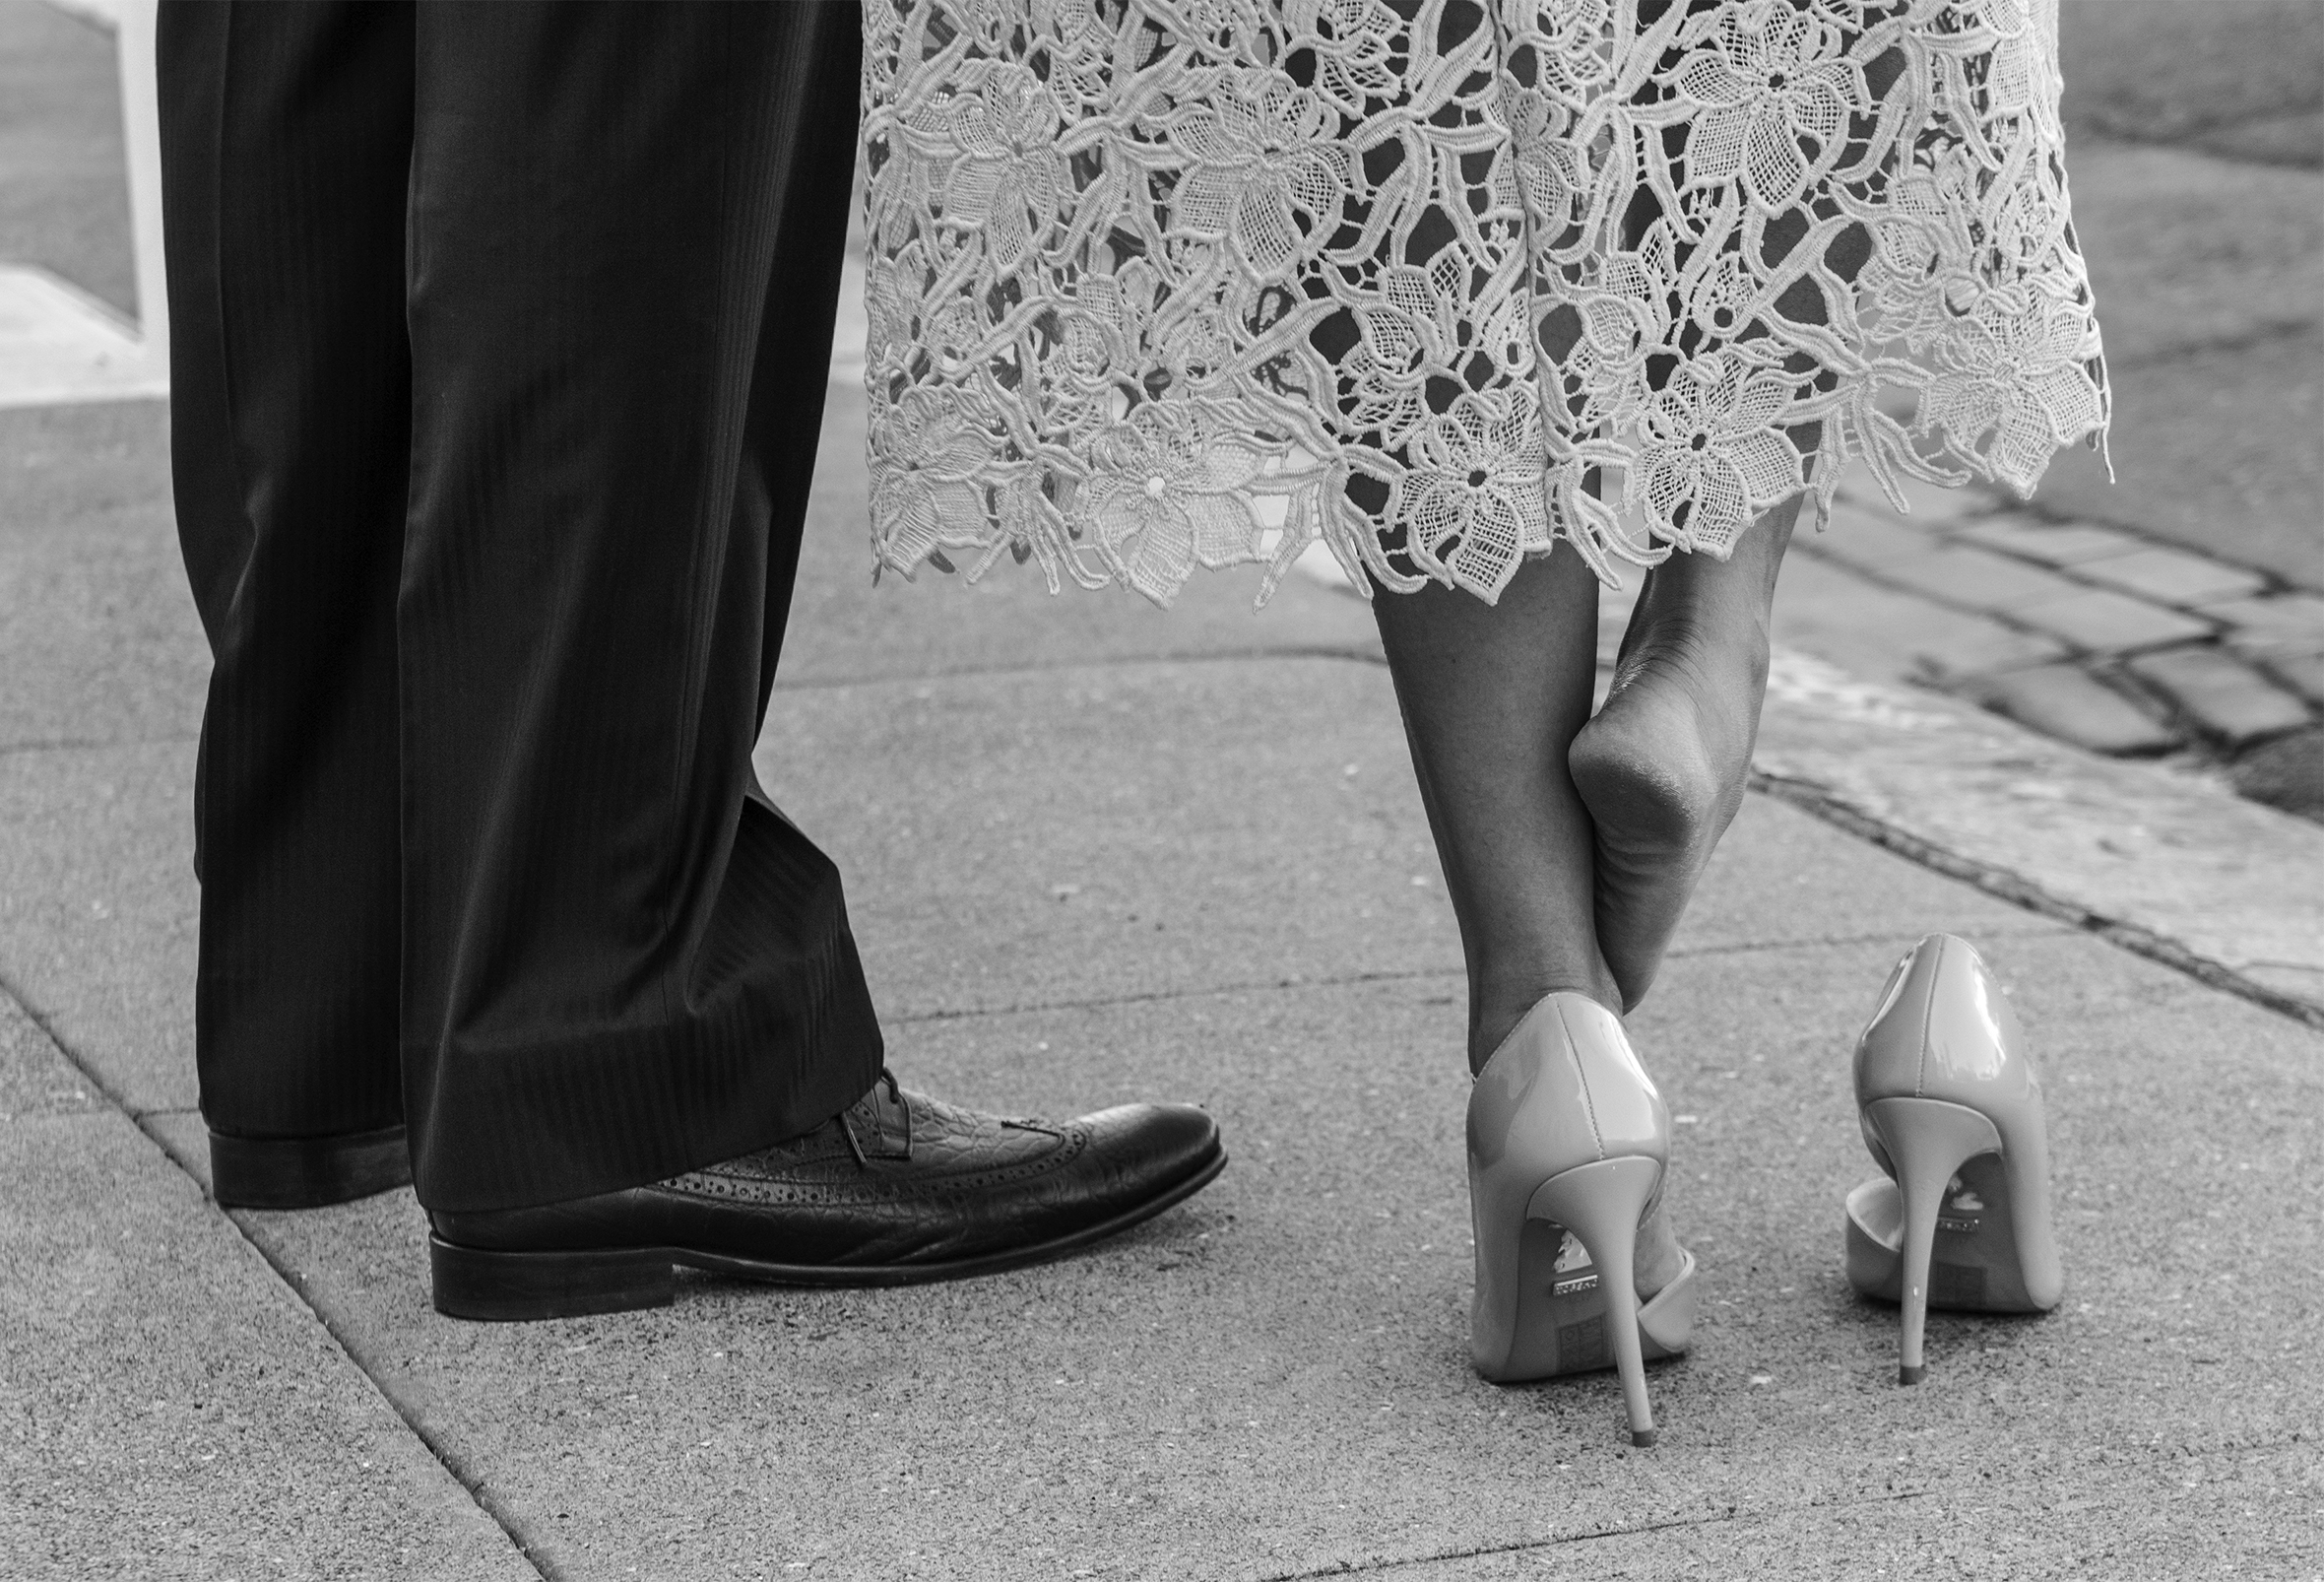 A man and woman stand on a sidewalk. Seen from the knees down, he is wearing dress pants and shoes, she is wearing a midcalf linen dress with flowered lace above the hem and high heels. Her right foot is out of its shoe and is rubbing her left ankle.